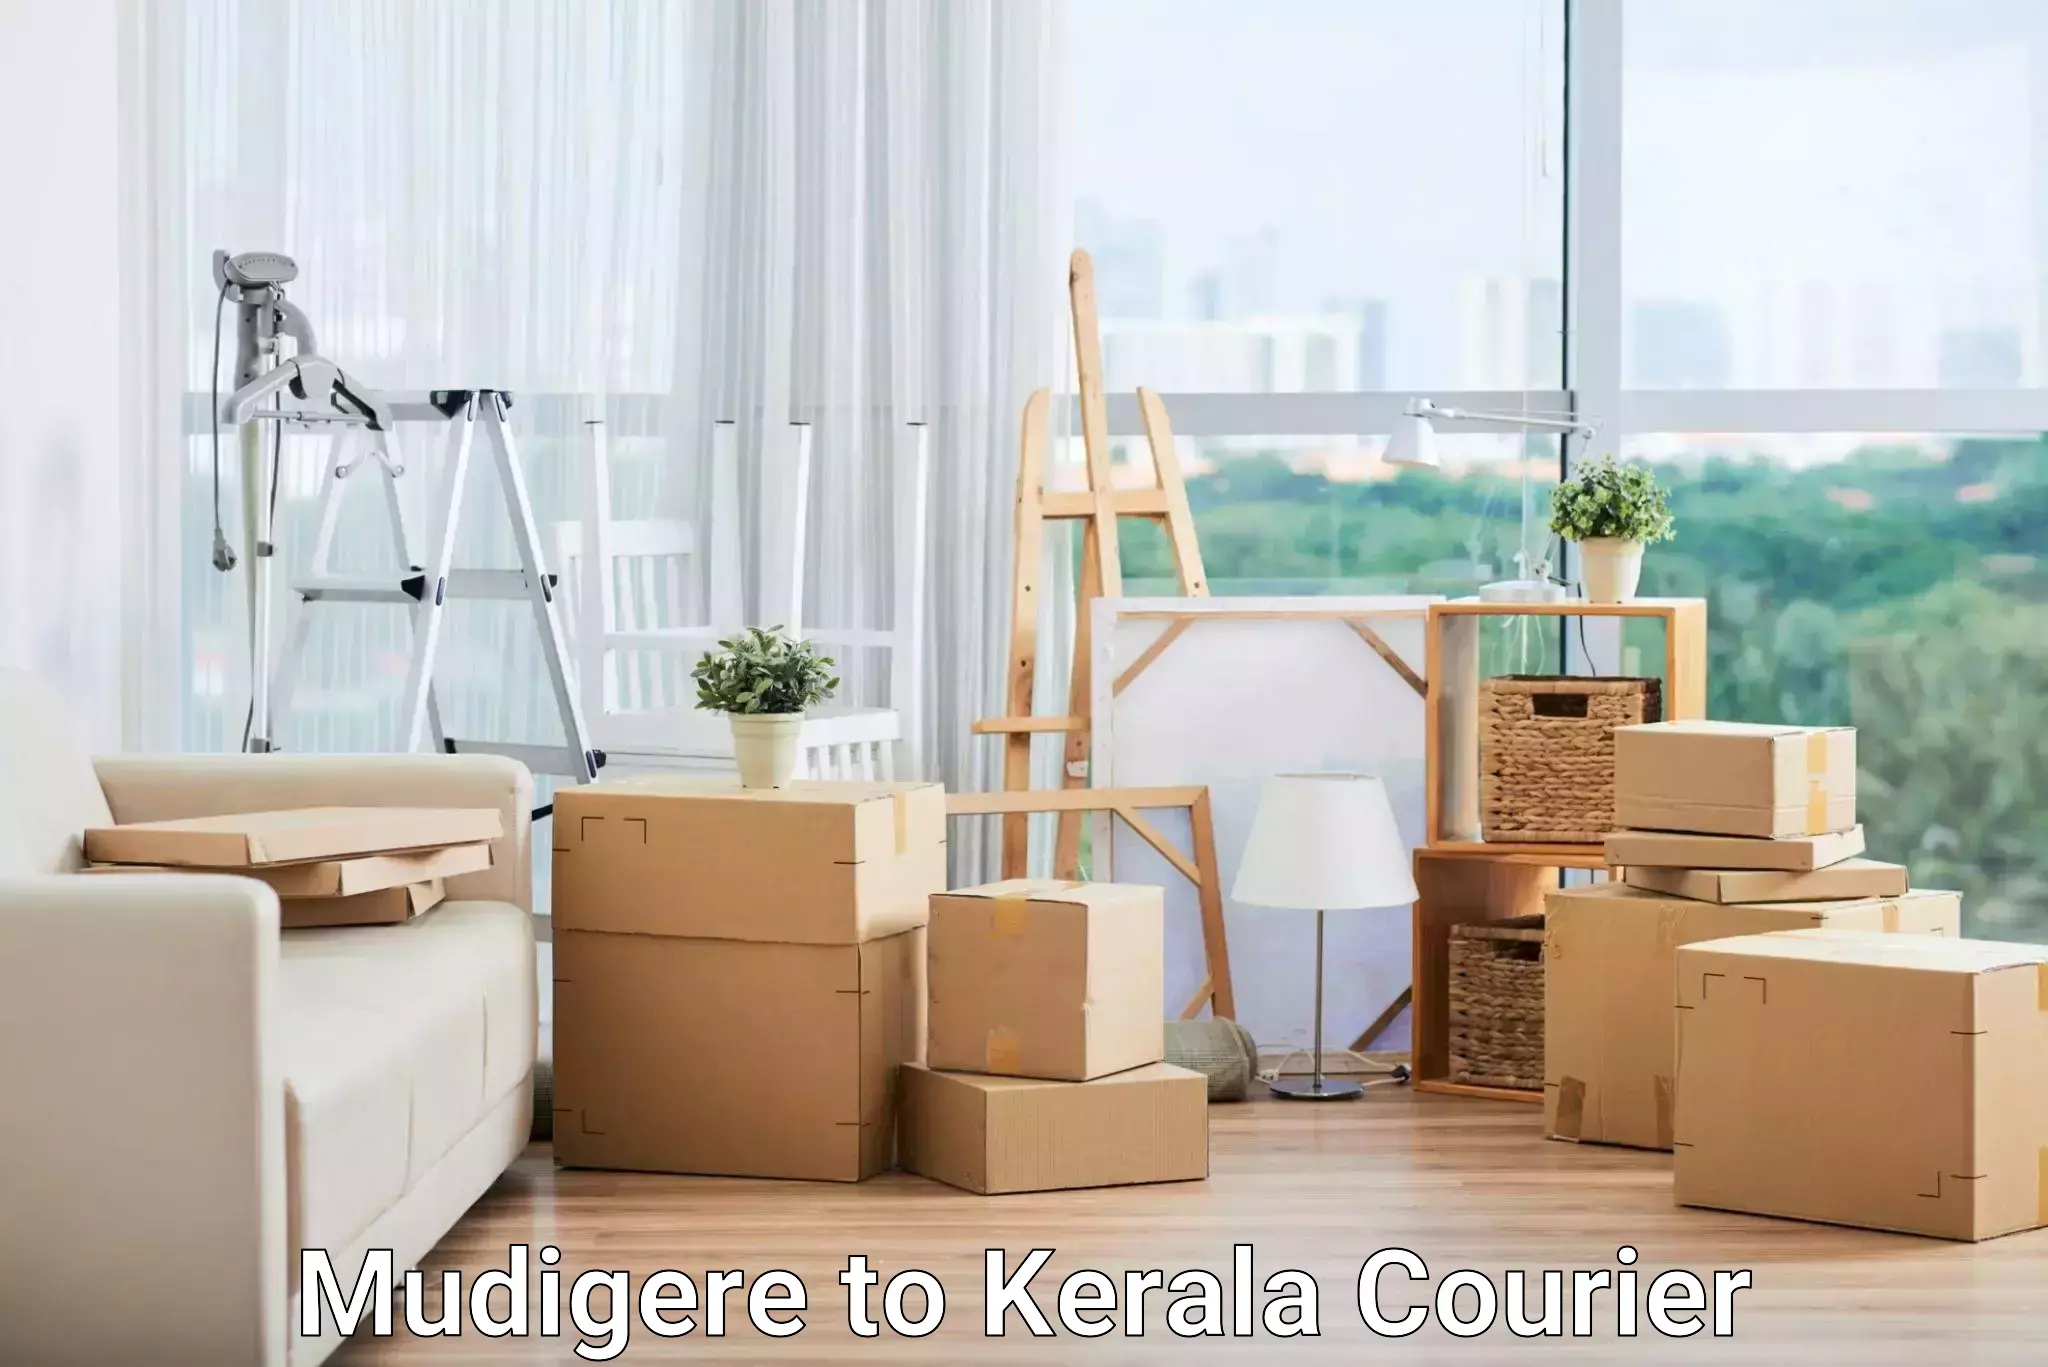 Express delivery network Mudigere to Kerala